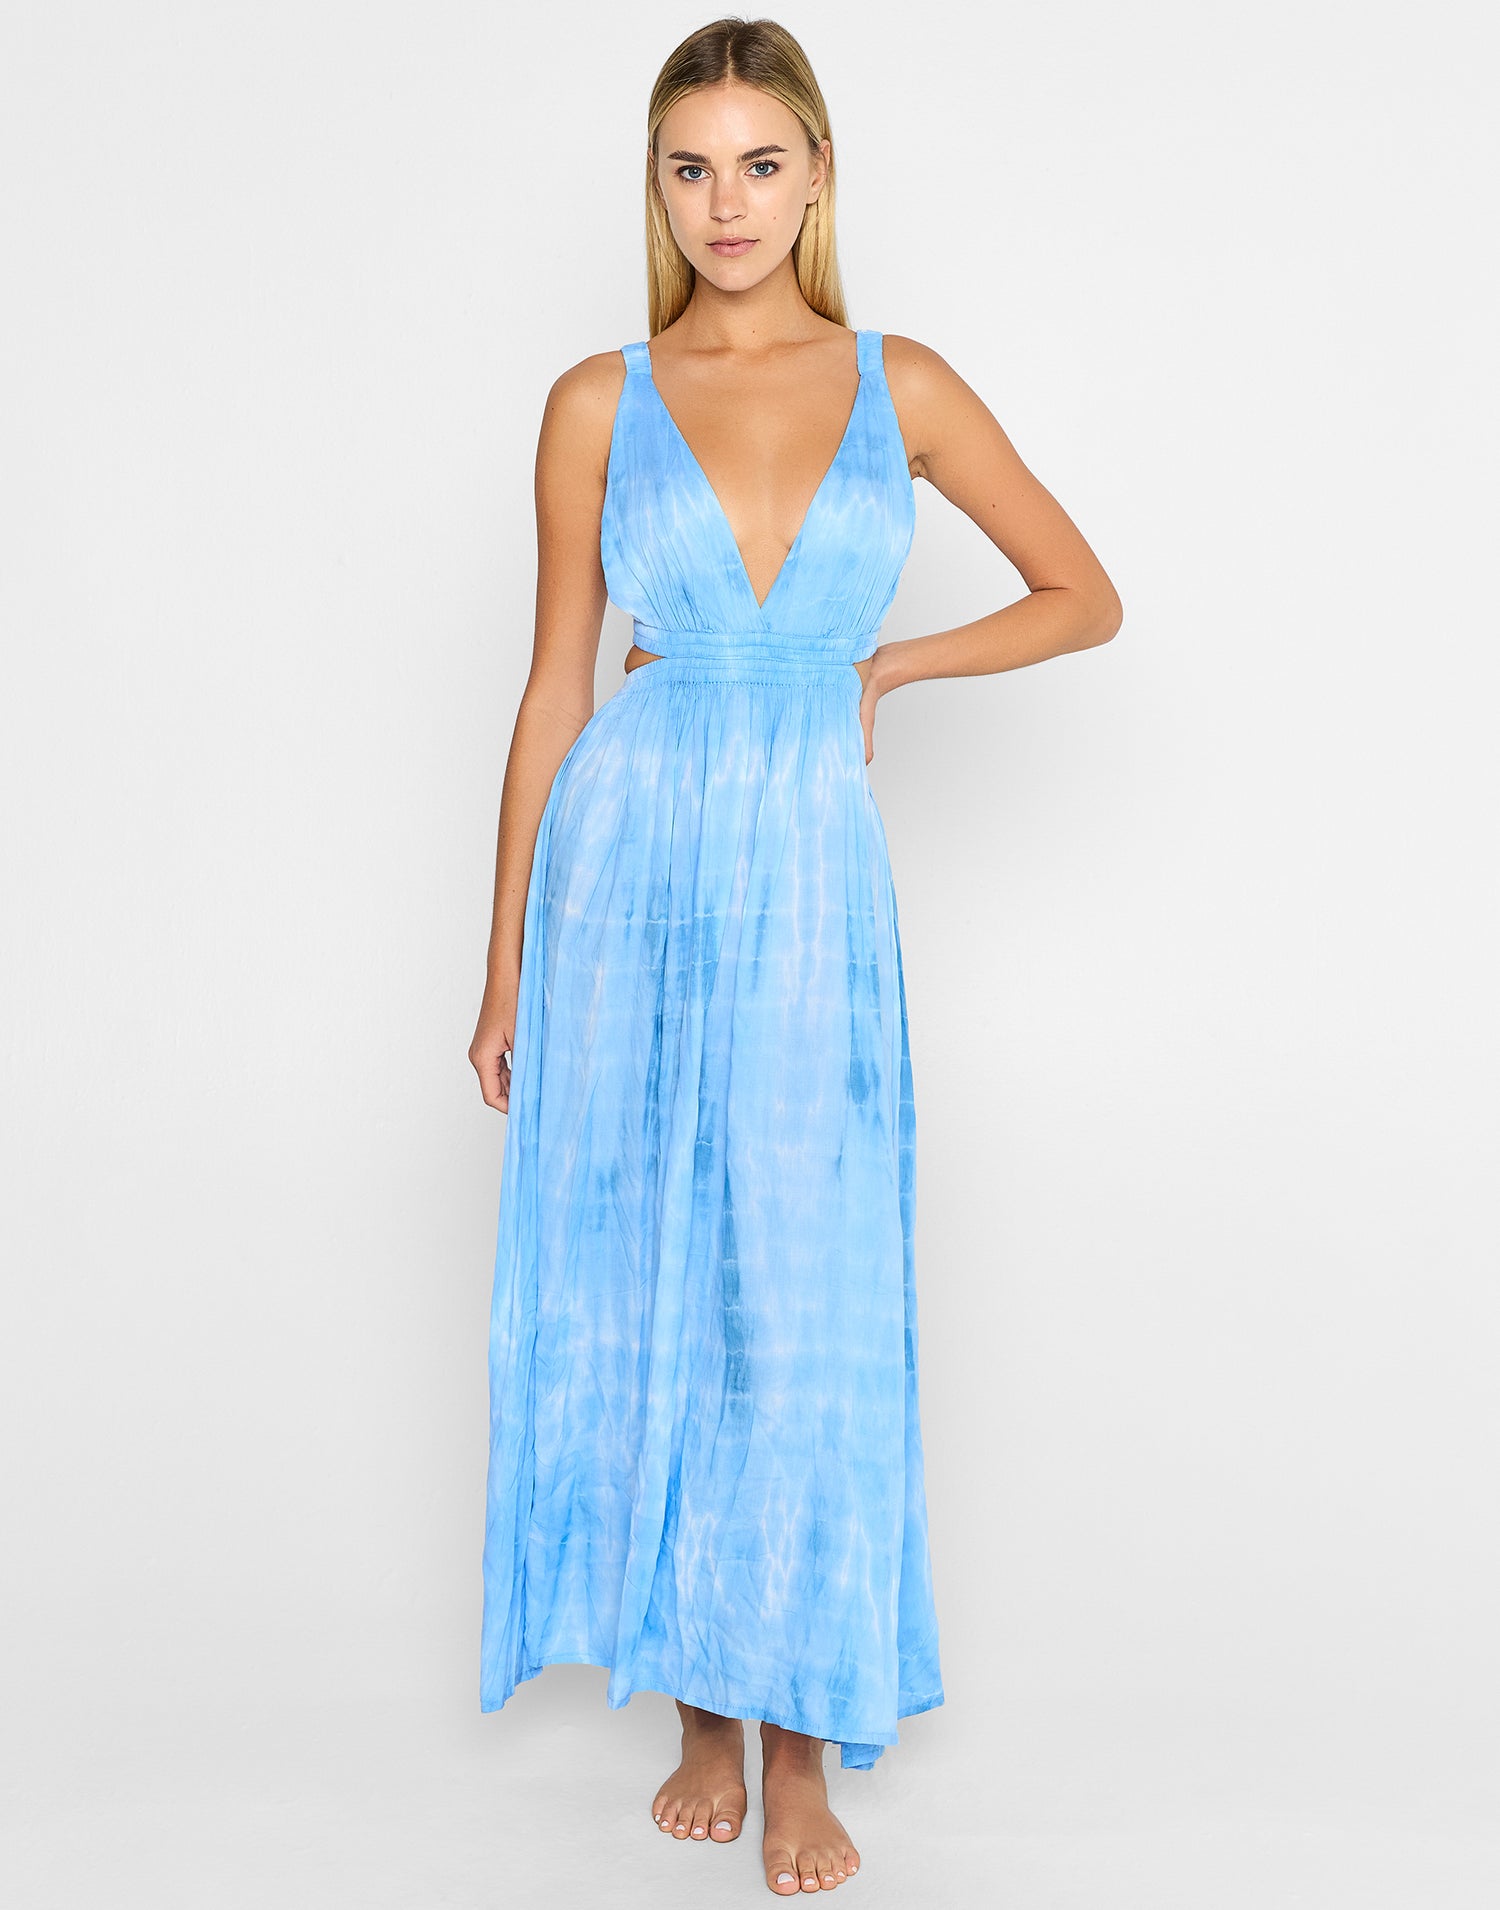 Hope Maxi Dress by Tiare Hawaii i Sky Grey Tie Dye - Front View